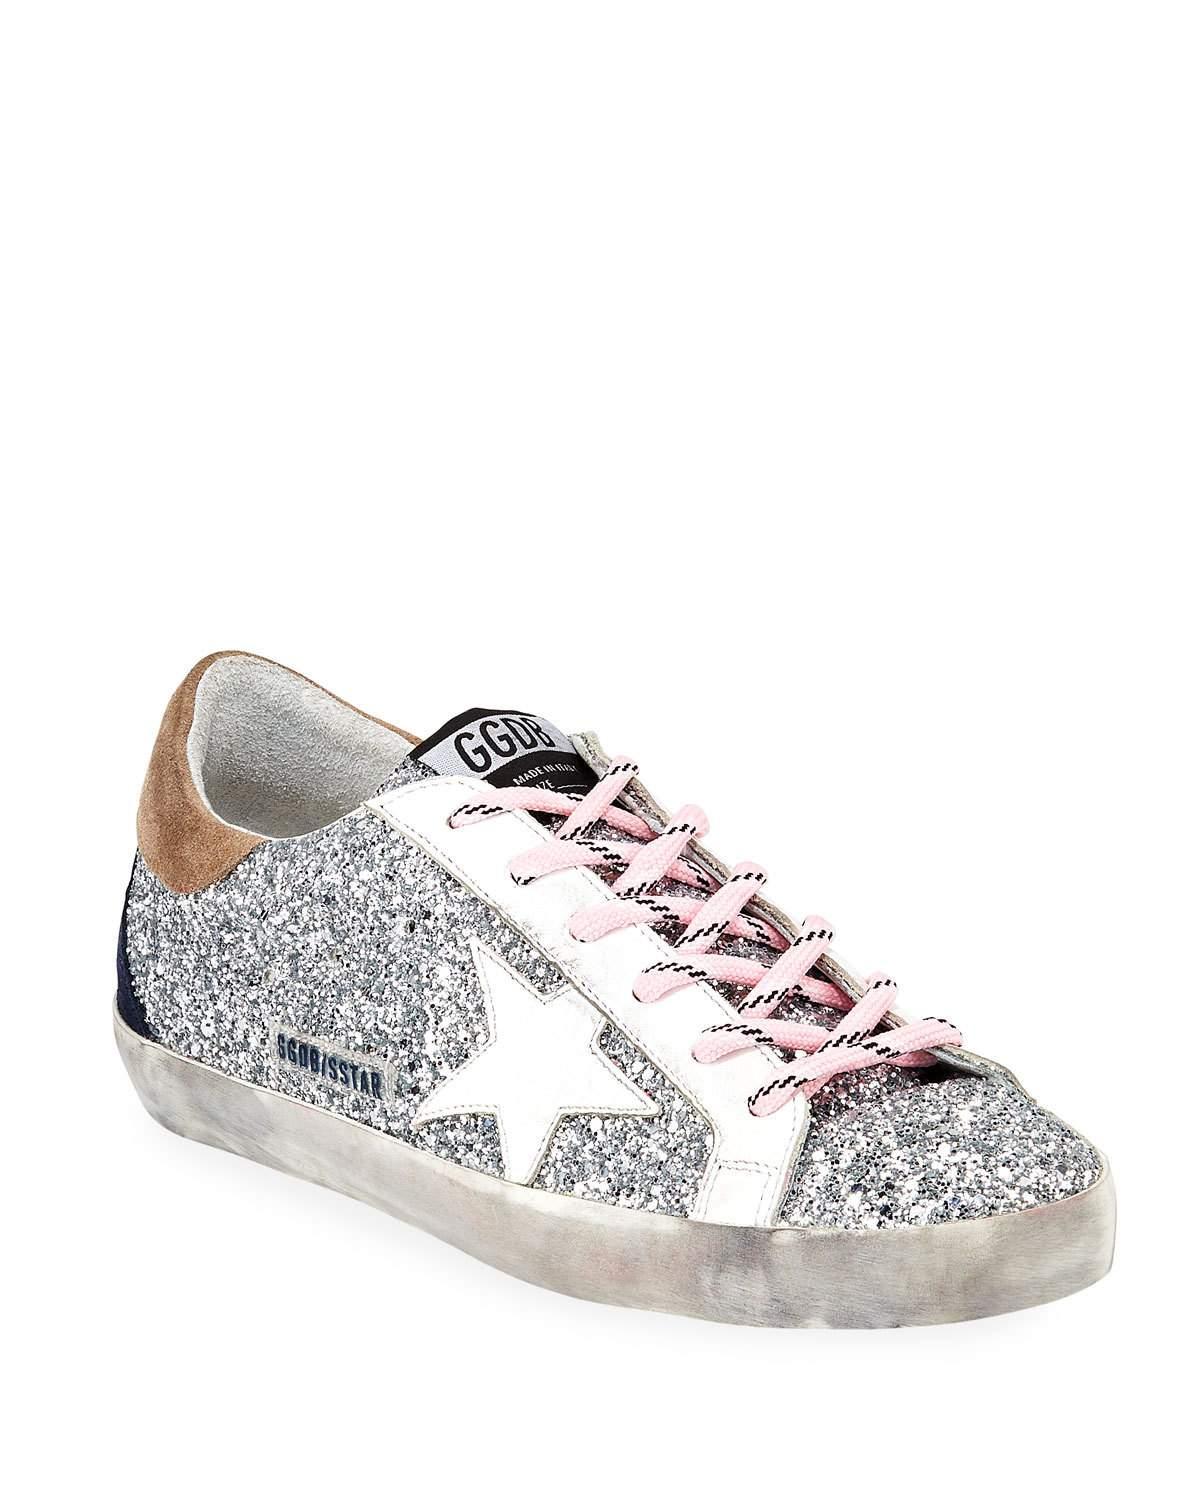 Golden Goose Deluxe Brand Goose Superstar Glitter Lace-up Sneakers in ...